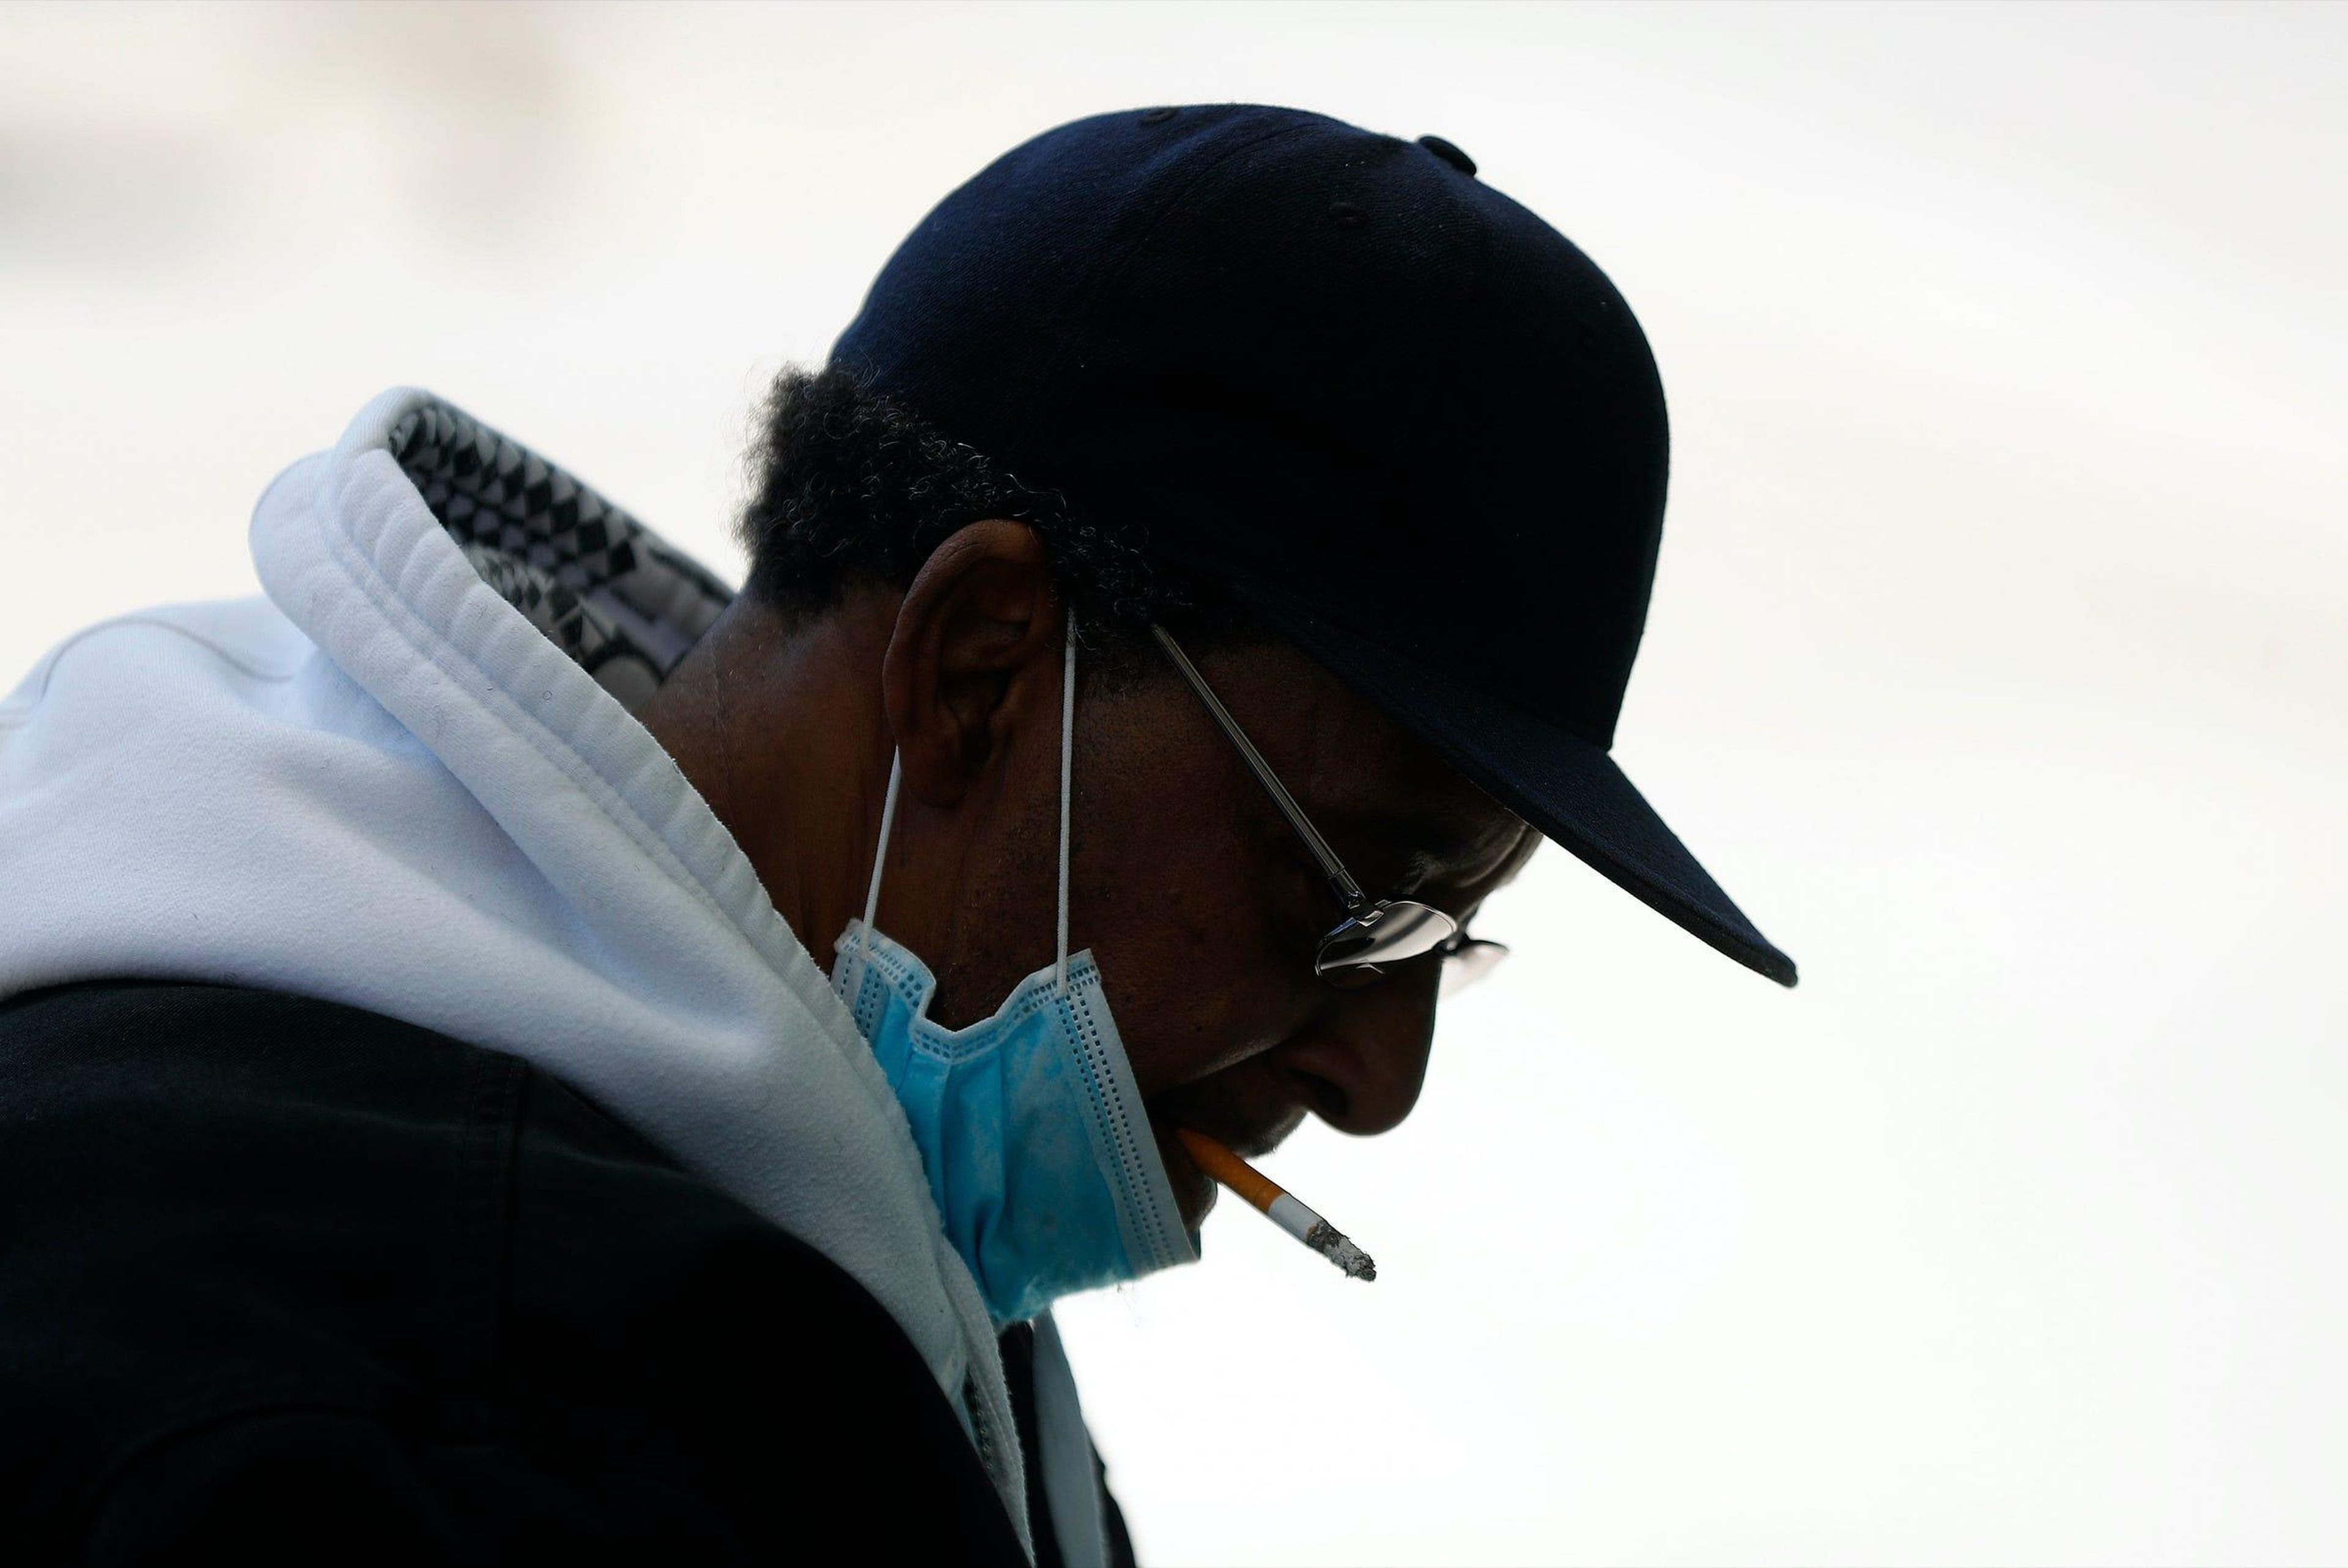 A man smokes a cigarette while wearing a protective mask while waiting for a bus in Detroit, Wednesday, April 8, 2020.